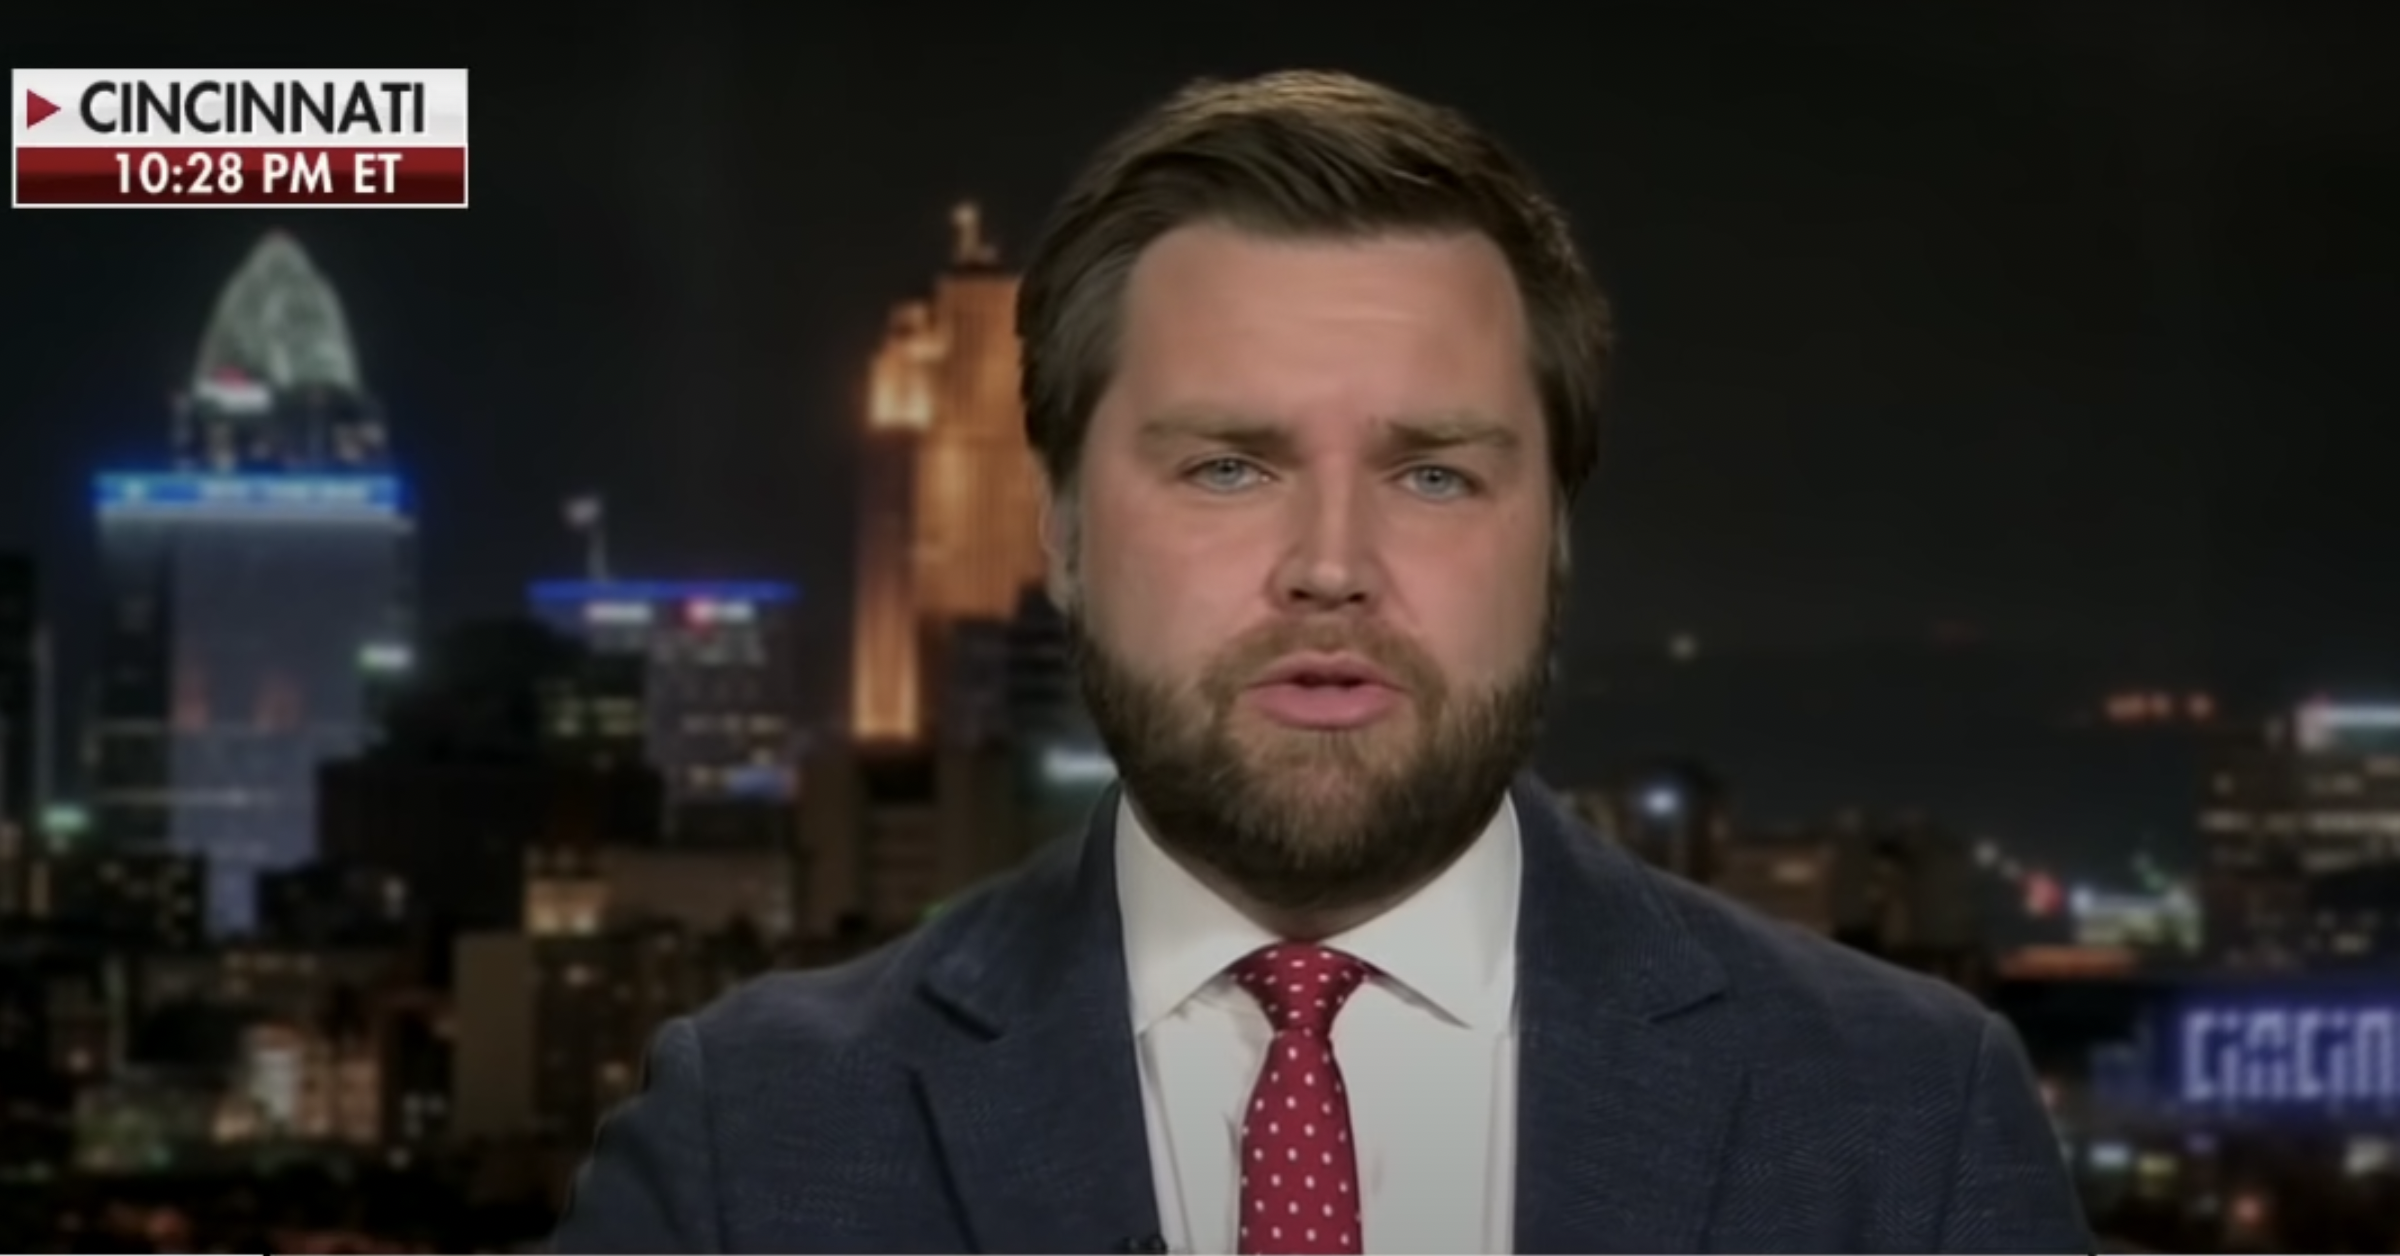 GOP Insiders Reportedly Sounding ‘Code Red’ Over JD Vance Blowing Ohio Senate Race: ‘Worst Campaign’ You Could Possibly Run (mediaite.com)